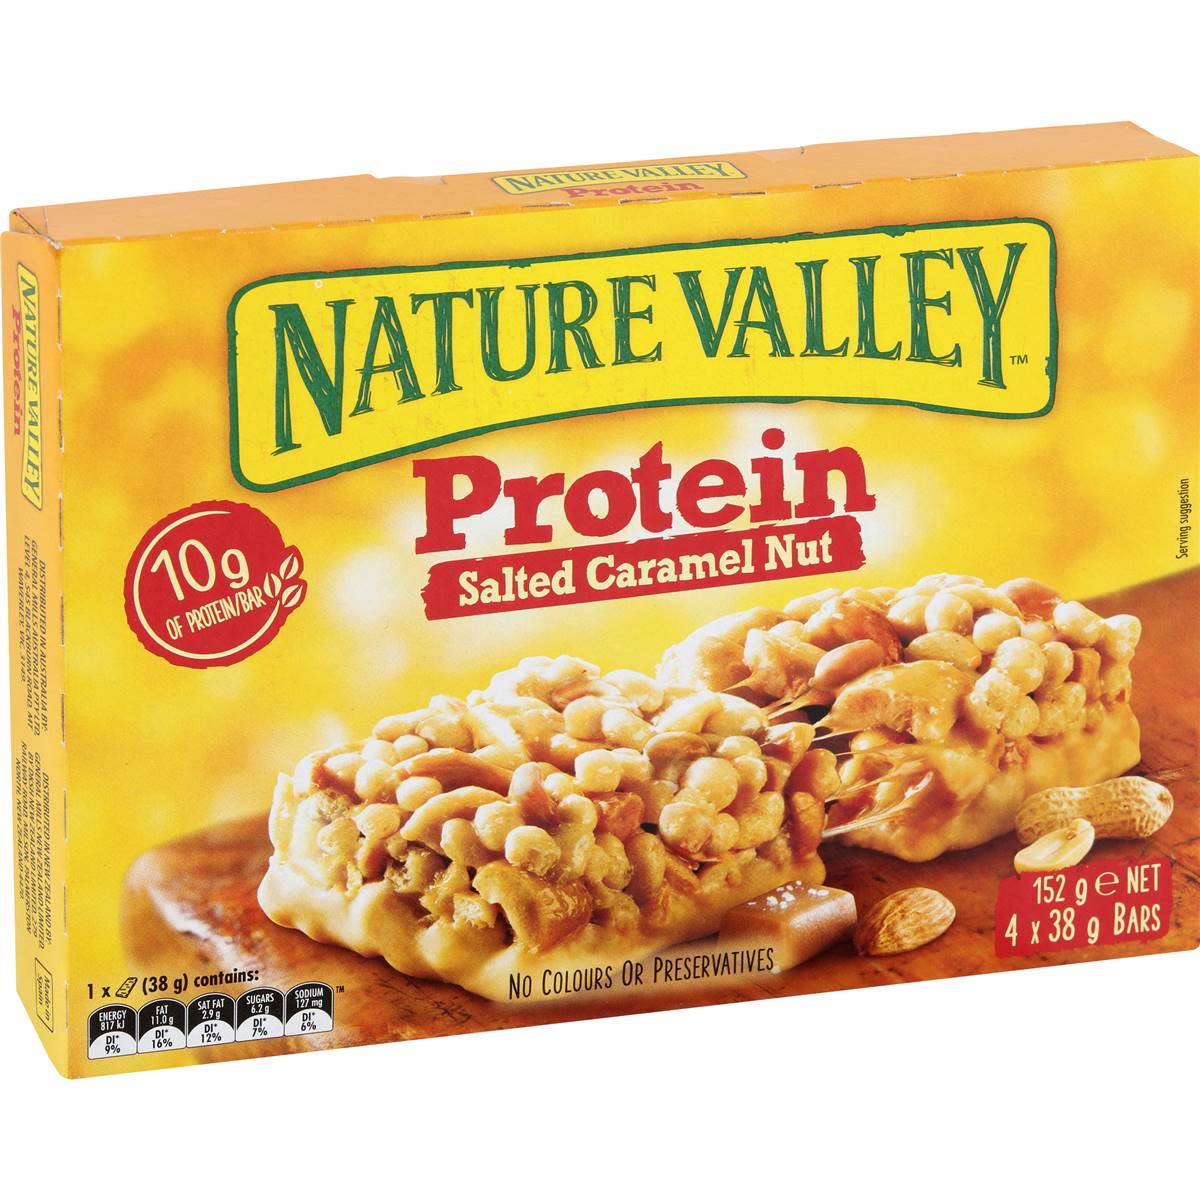 Calories in Nature Valley Protein Peanut & Chocolate Bars